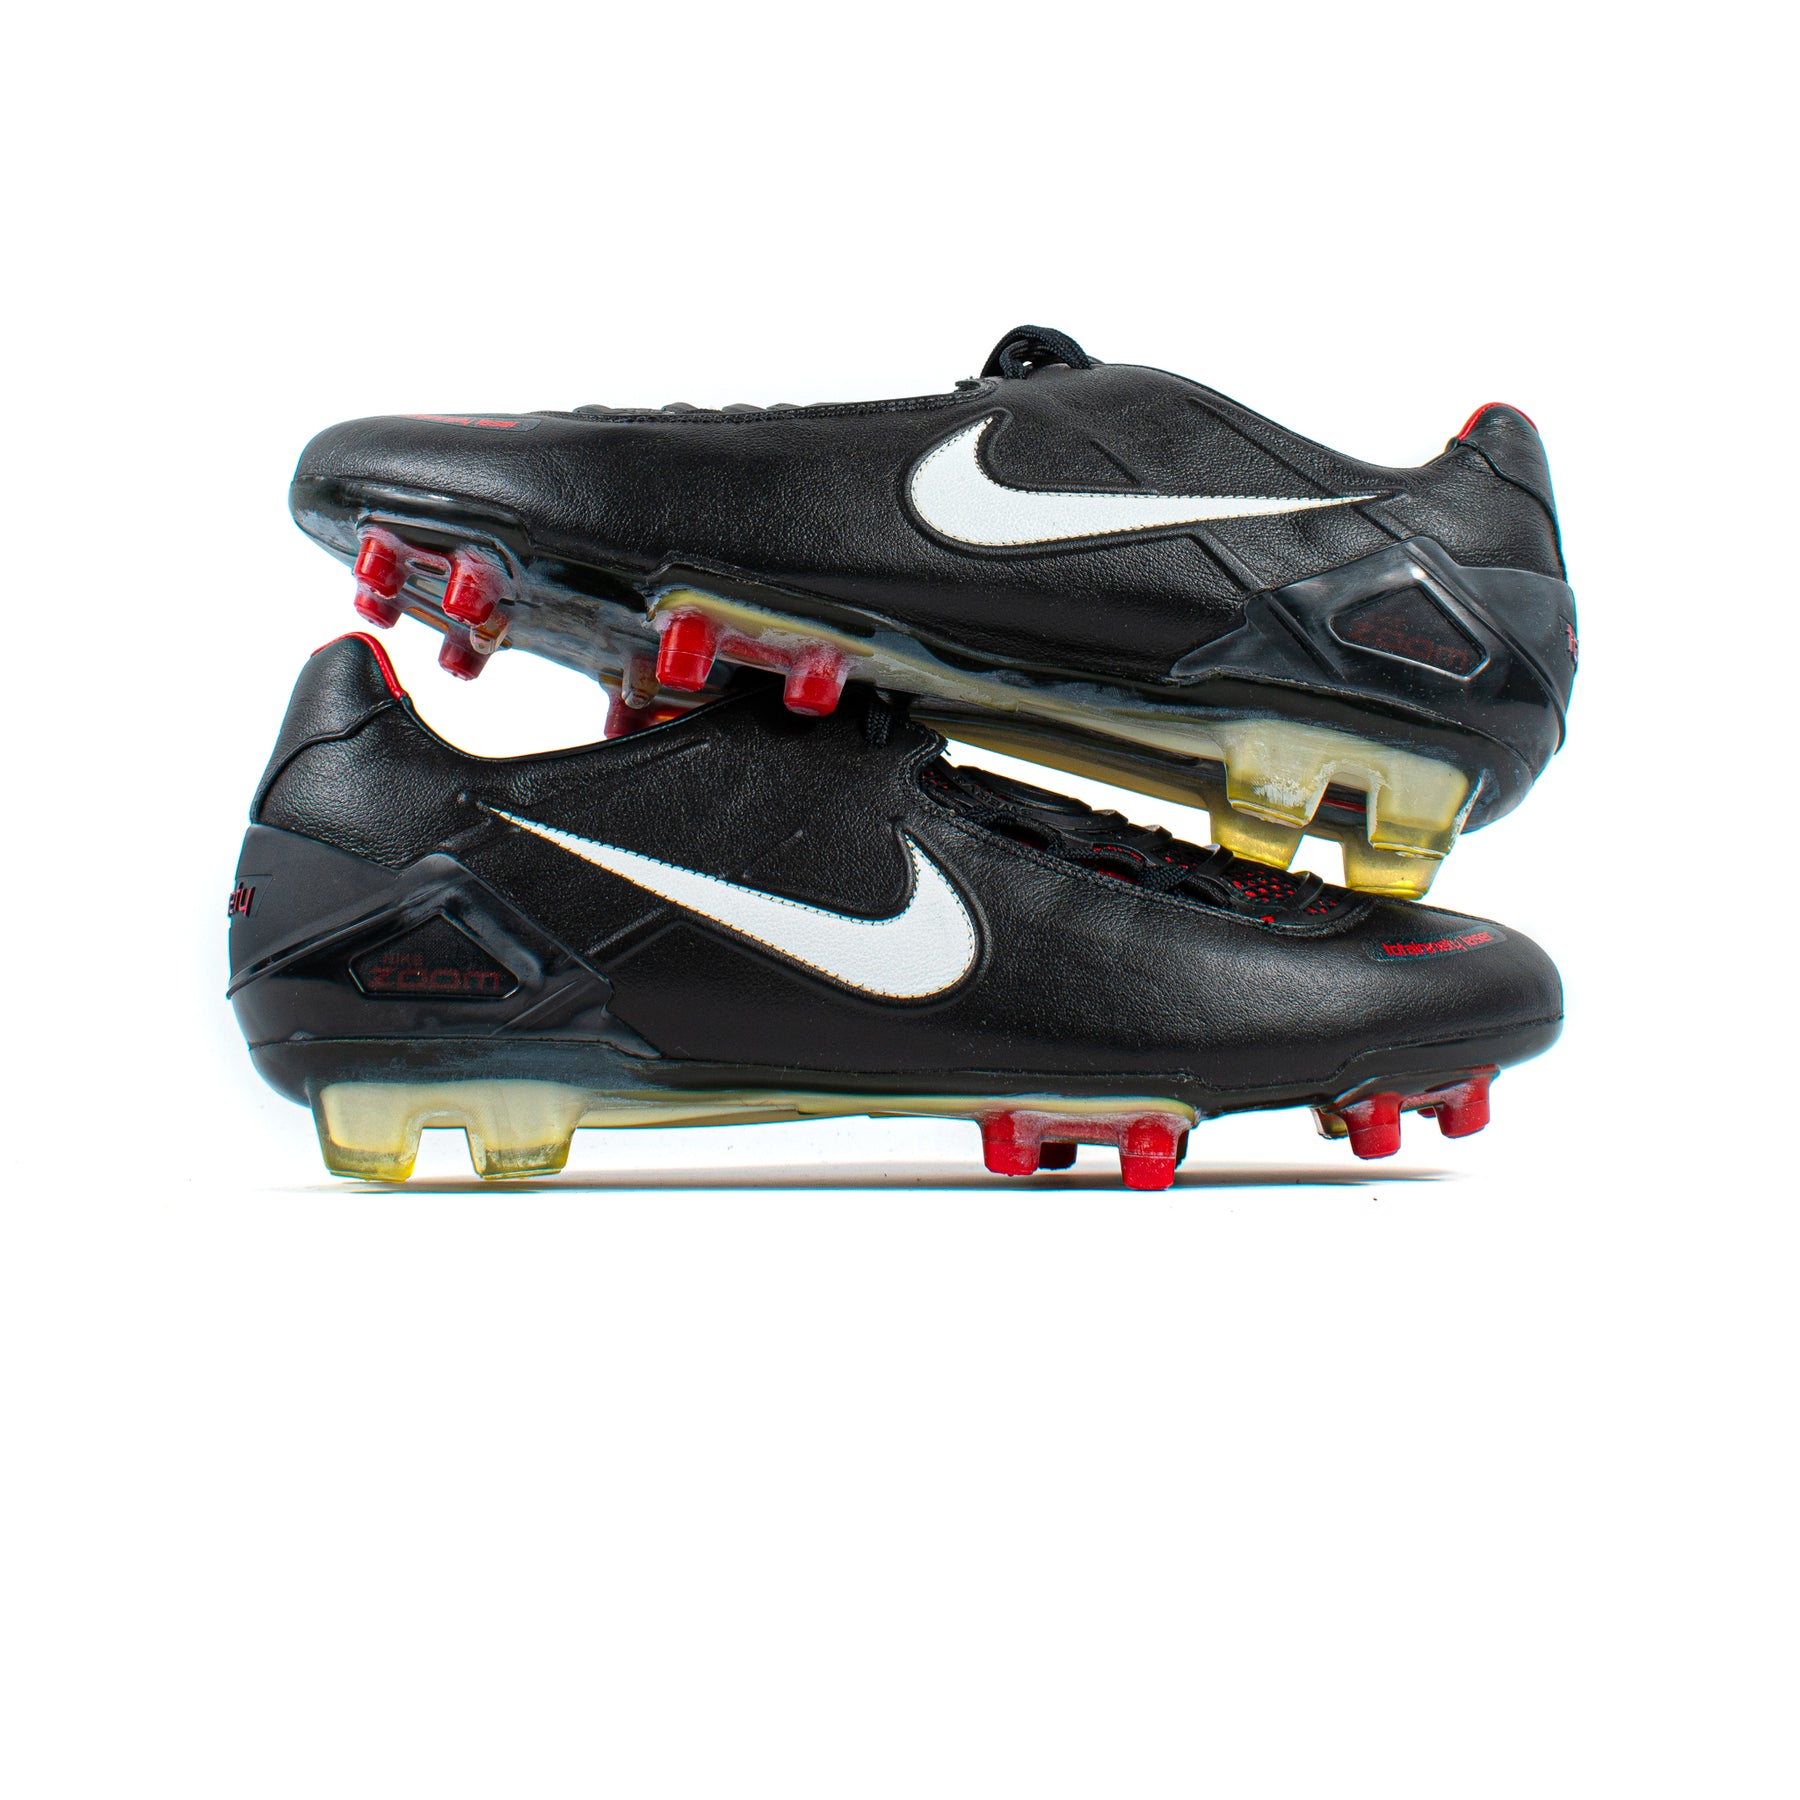 Nike Total 90 Laser I Black Red Fg – Classic Soccer Cleats